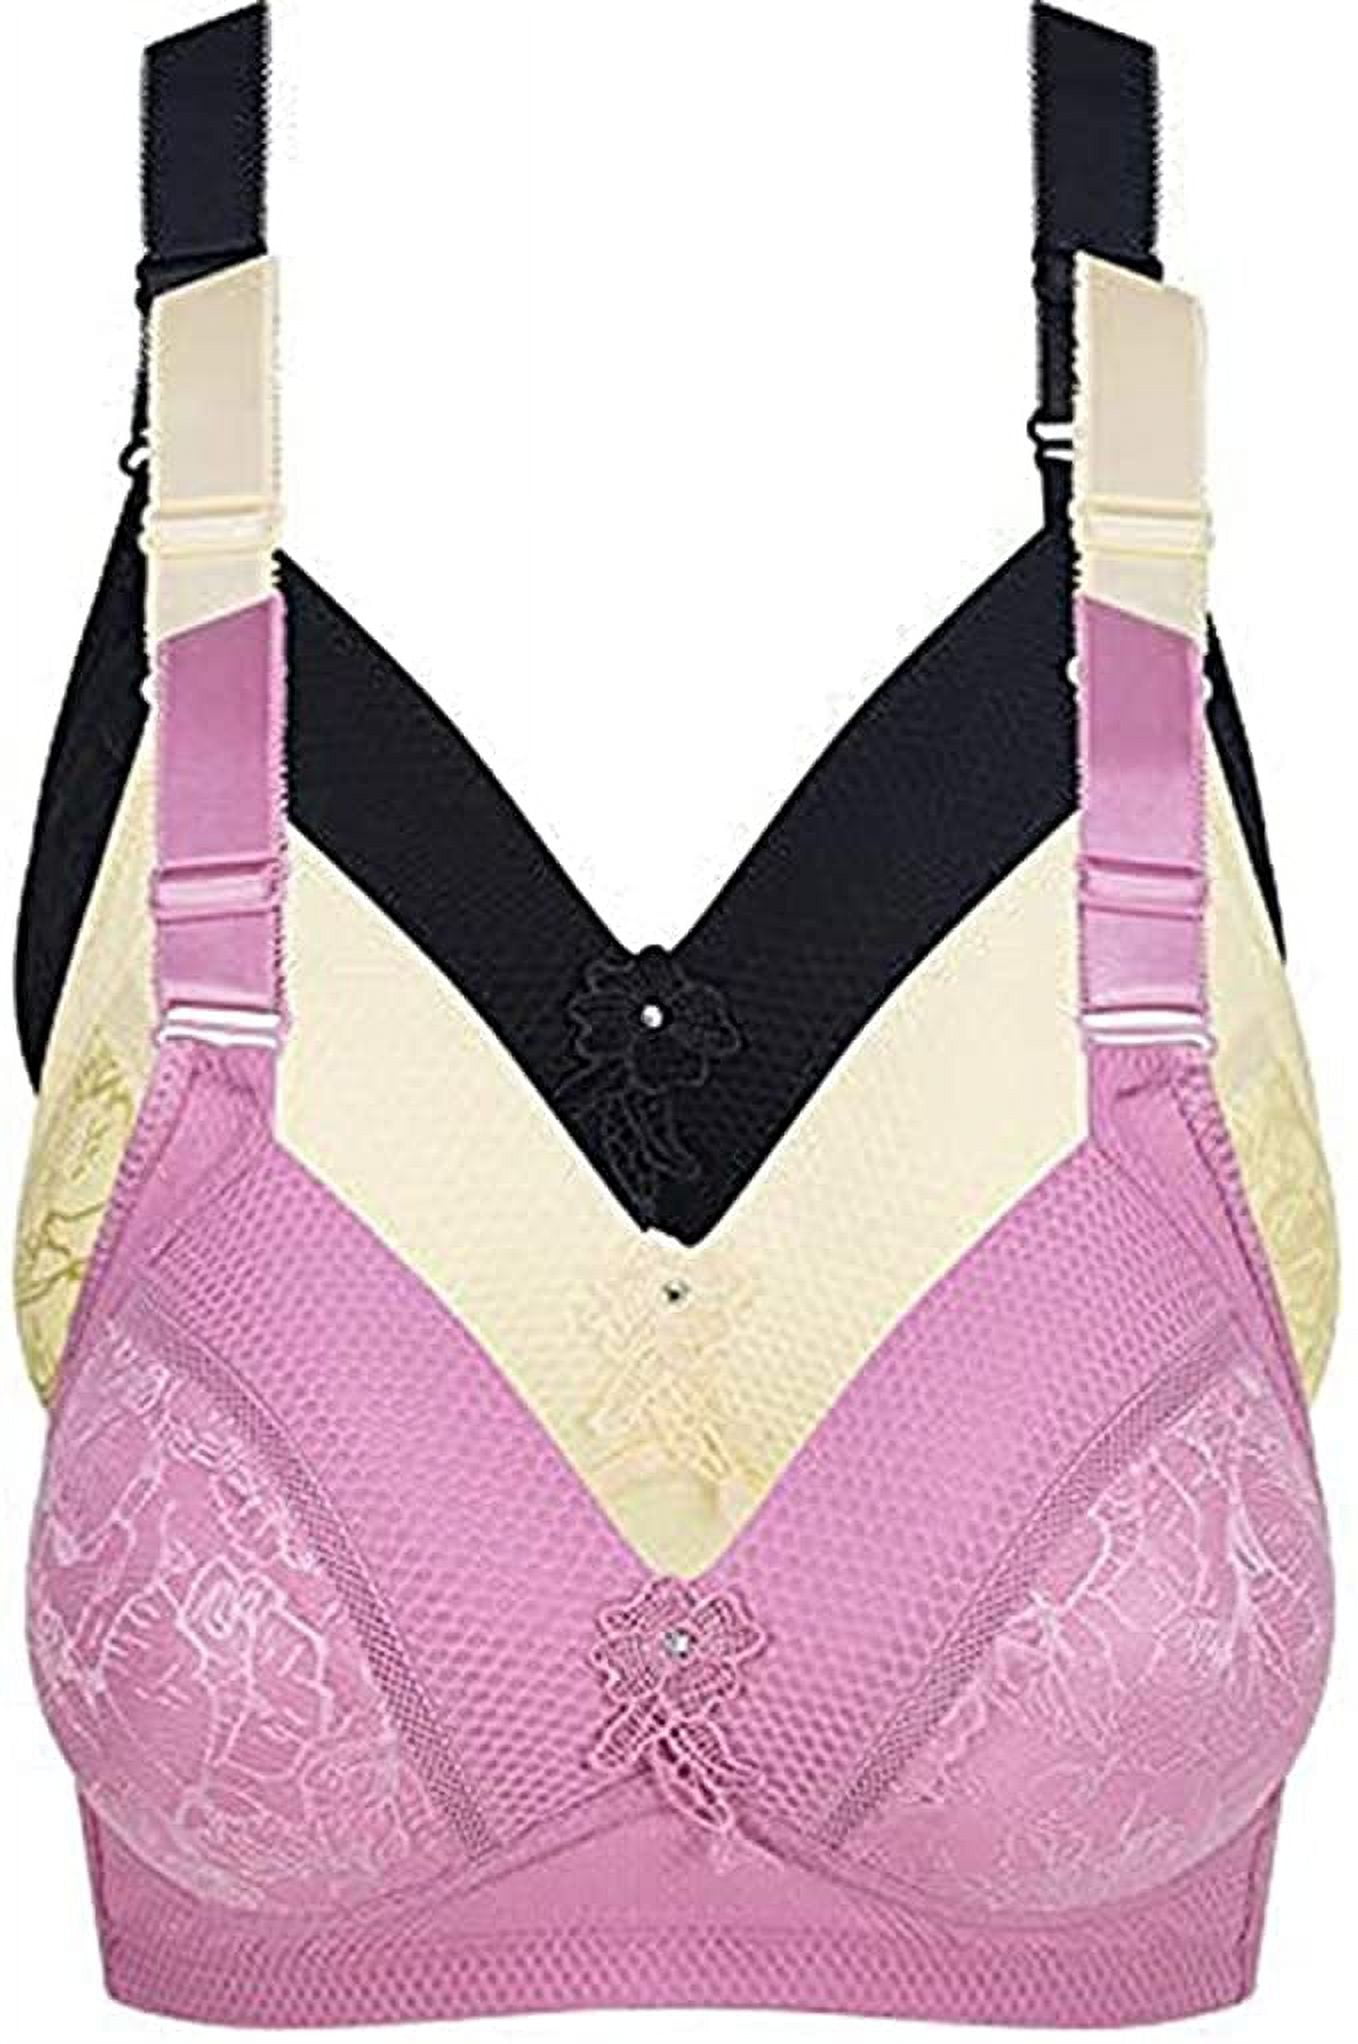 3pack Woman Padded Push-up Bras, Sexy Lace Cover Underwire, Silicone  BrassiereComfortable Bras for Women Padded Bras for Women GY83261-34C